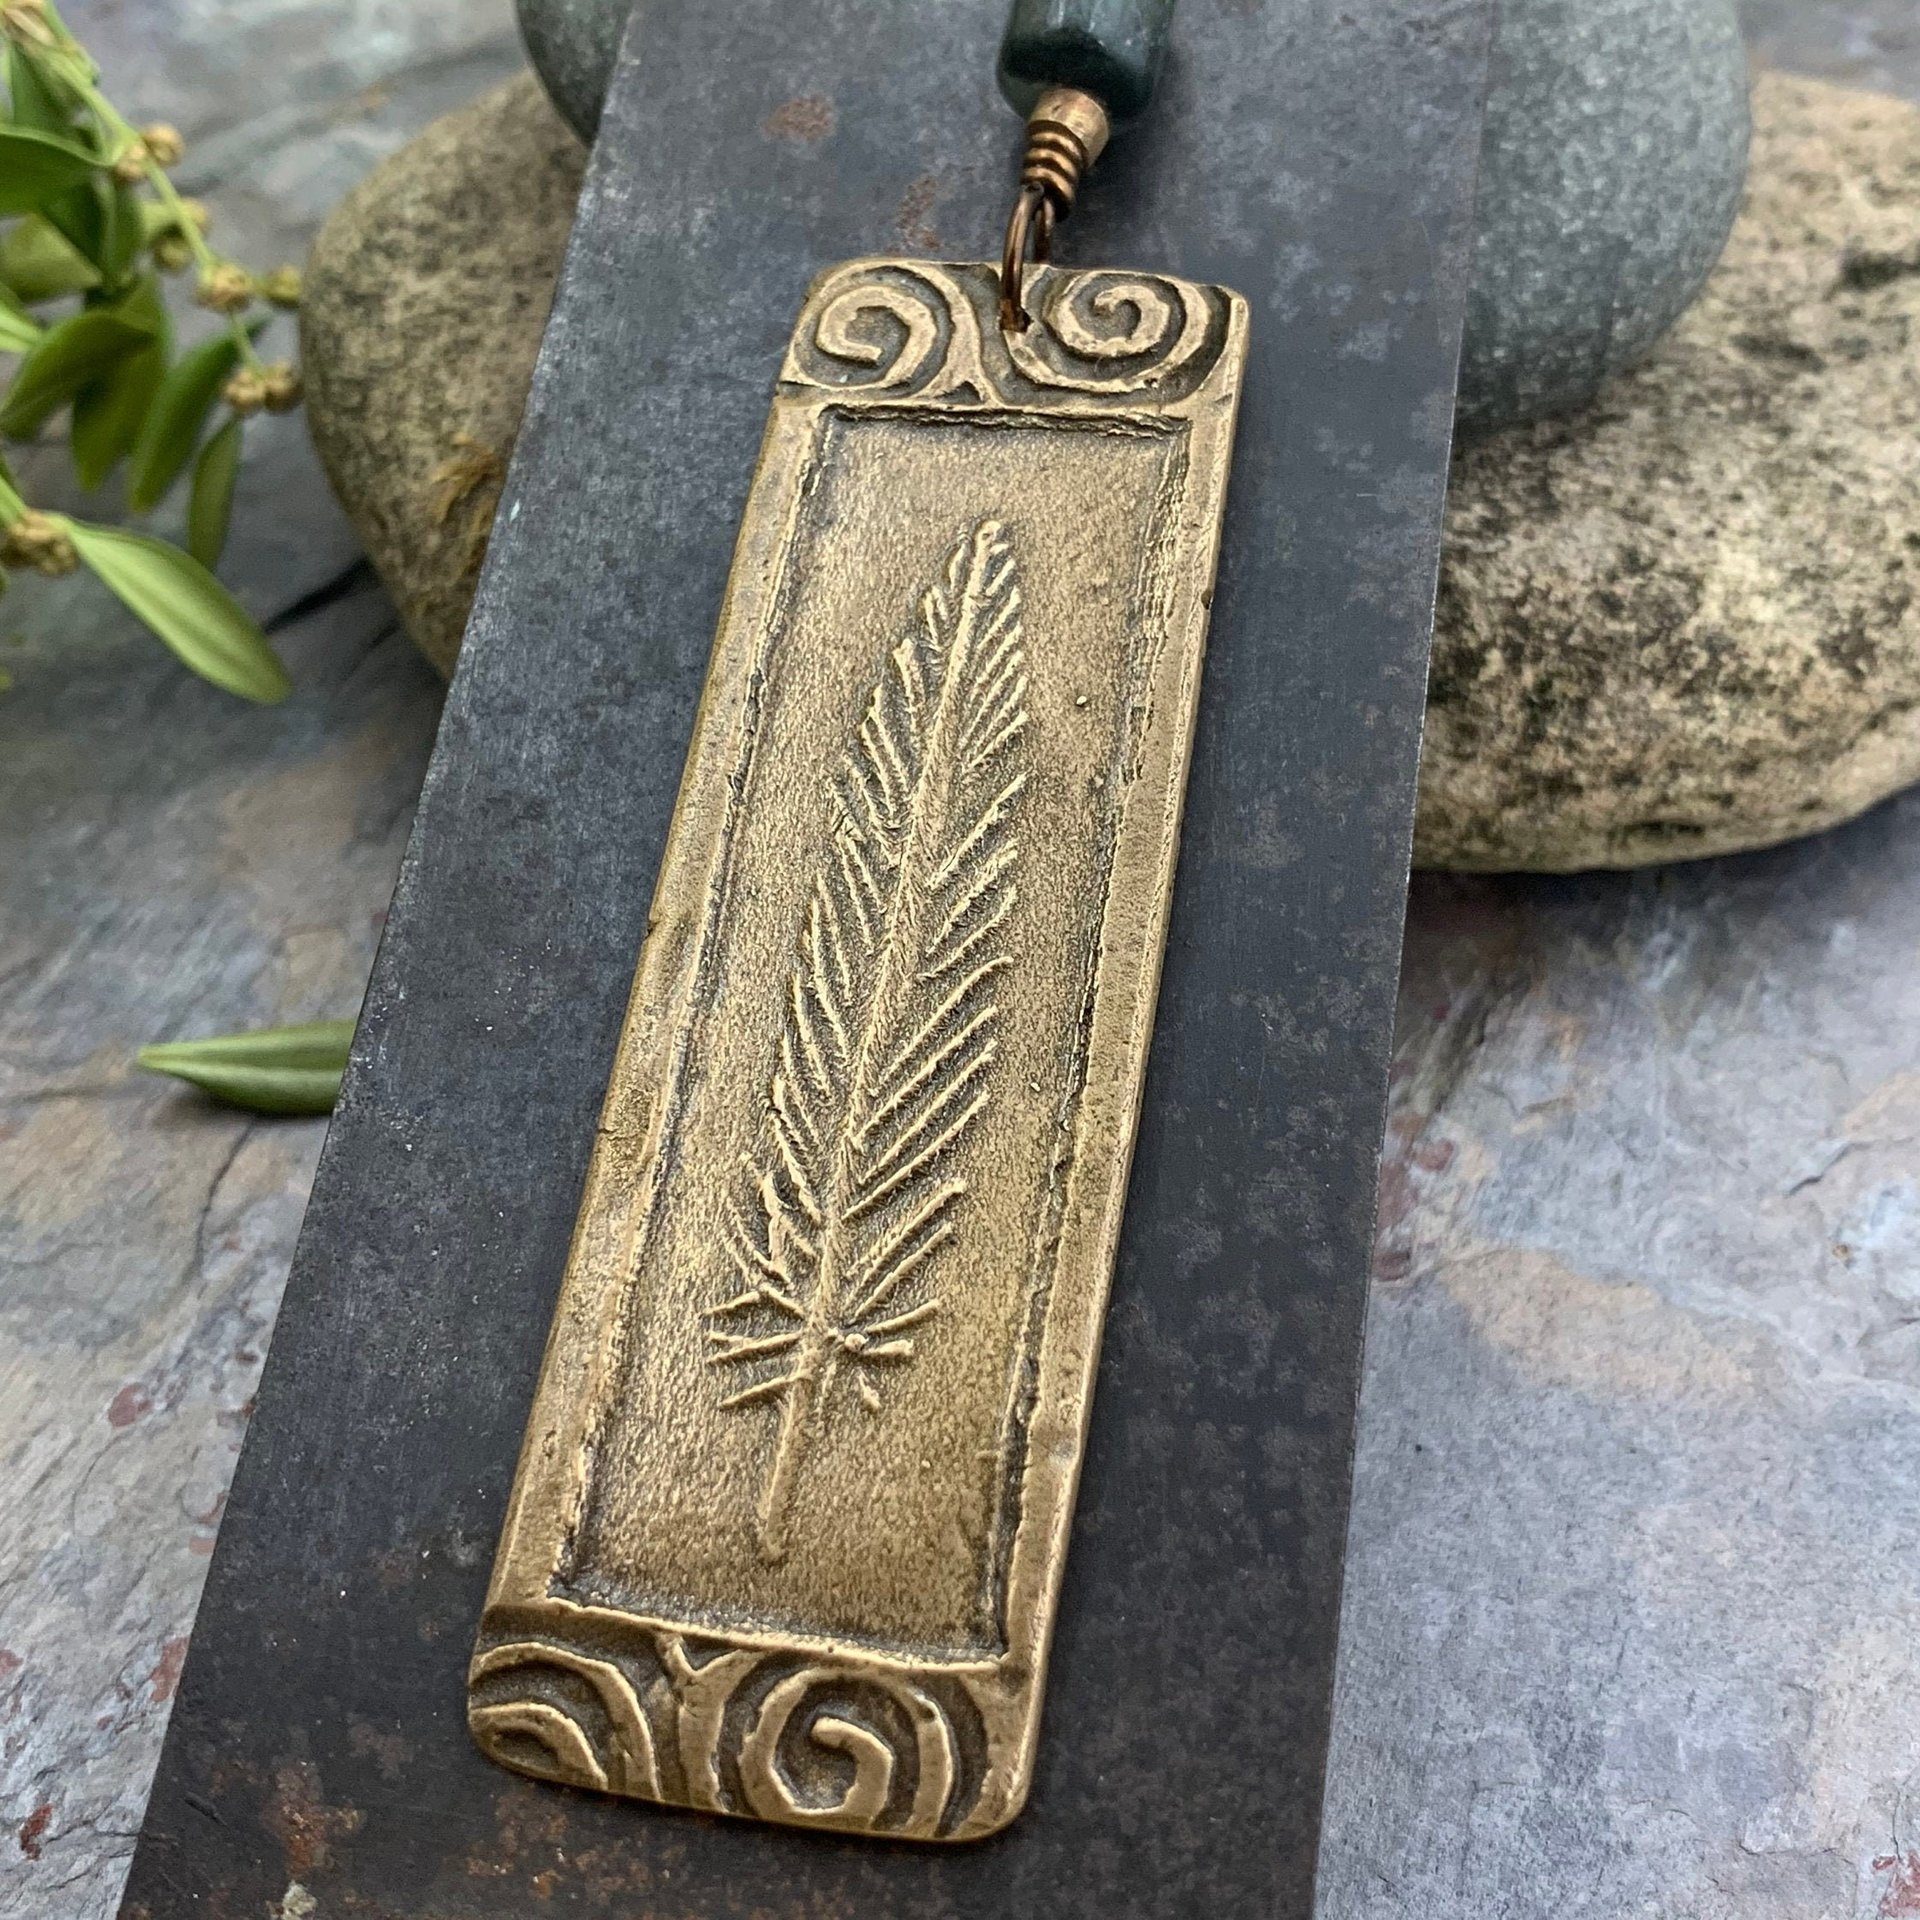 Bronze Feather Pendant, Connemara Marble, Celtic Spirals, Long Single Feather, Handmade, Art Jewelry, Long Necklace, Soul Harbor Jewelry